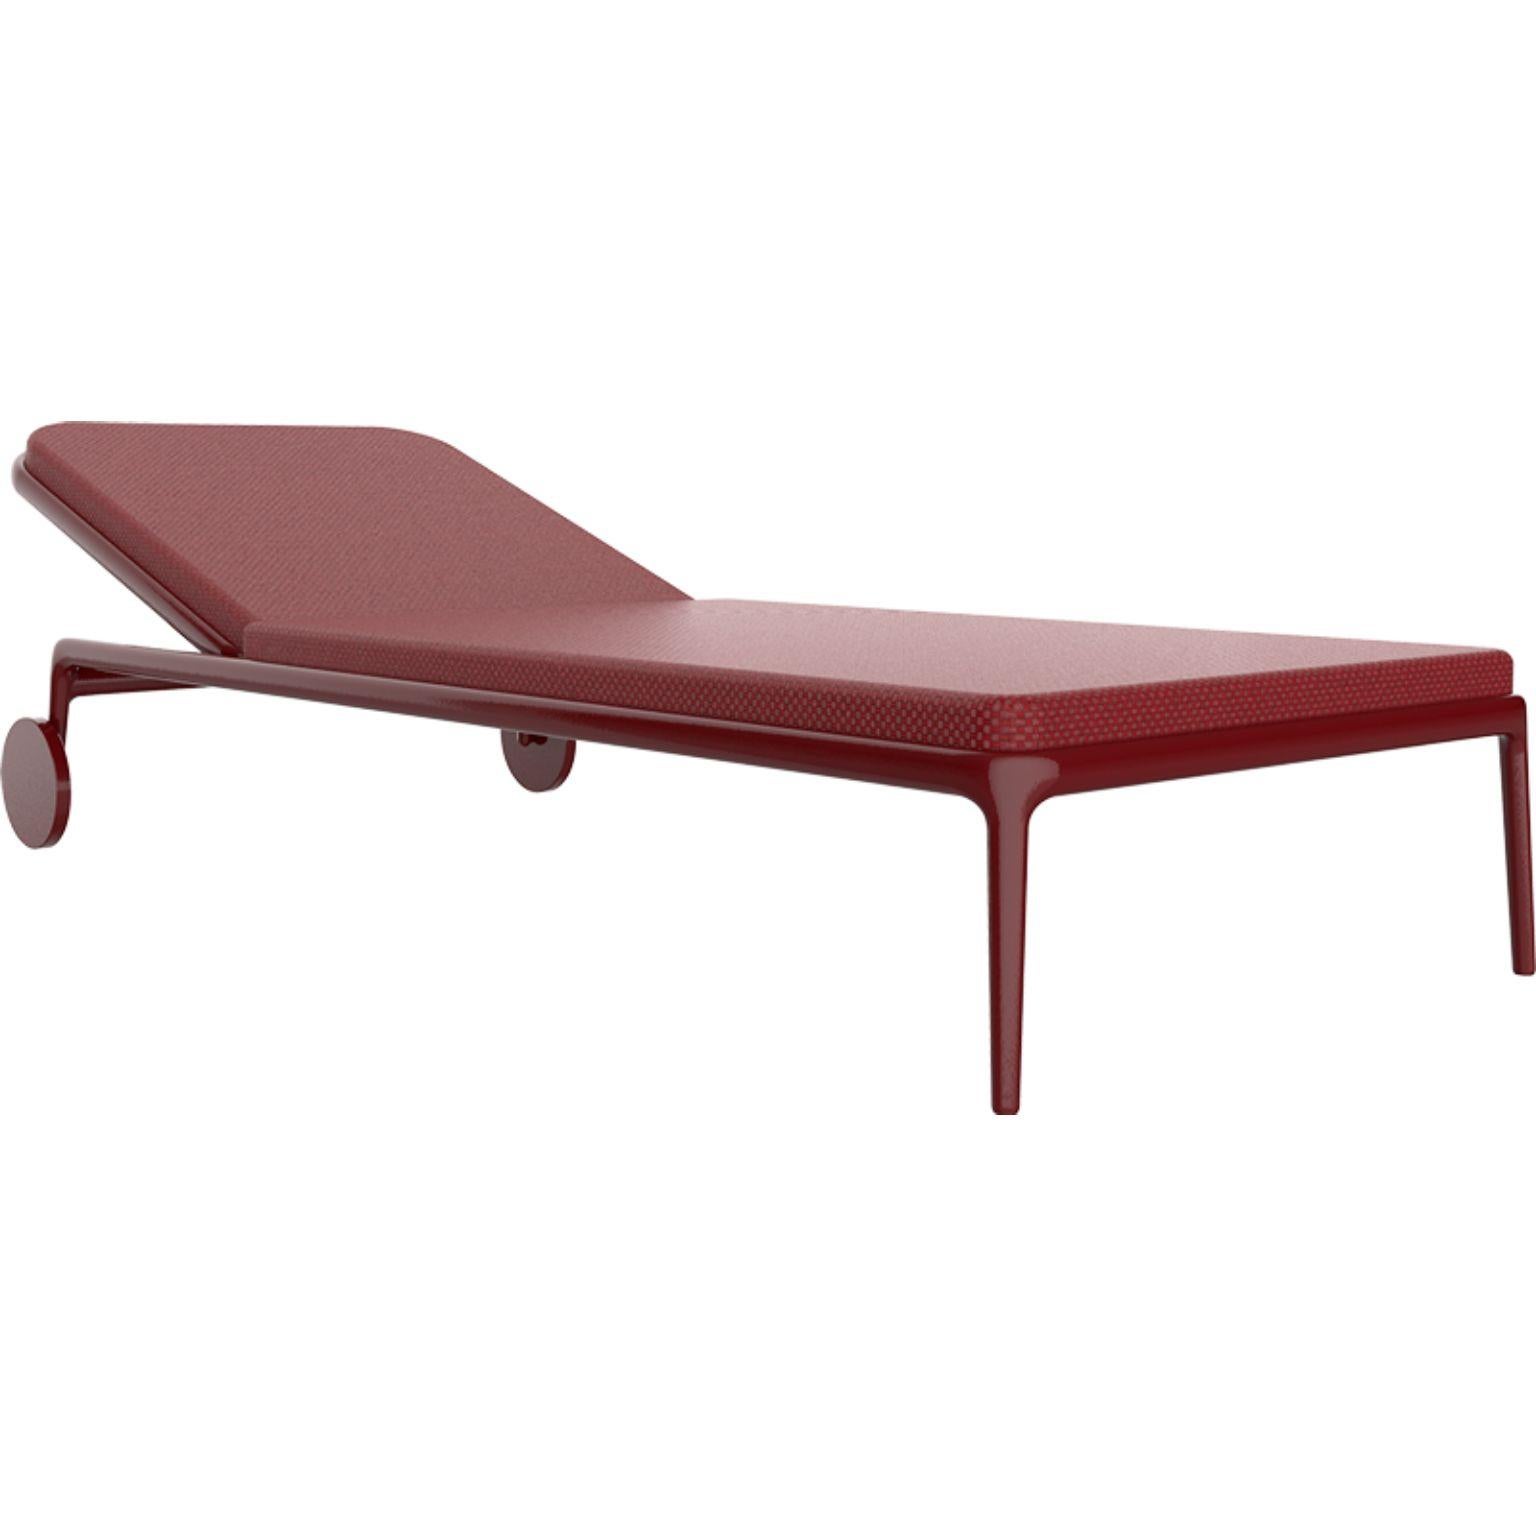 Xaloc burgundy sun chair by Mowee
Dimensions: D82 x W195 x H33 cm
Material: Aluminium, Textile
Weight: 24 kg
Also Available in different colours and finishes.

 Xaloc synthesizes the lines of interior furniture to extrapolate to the exterior,